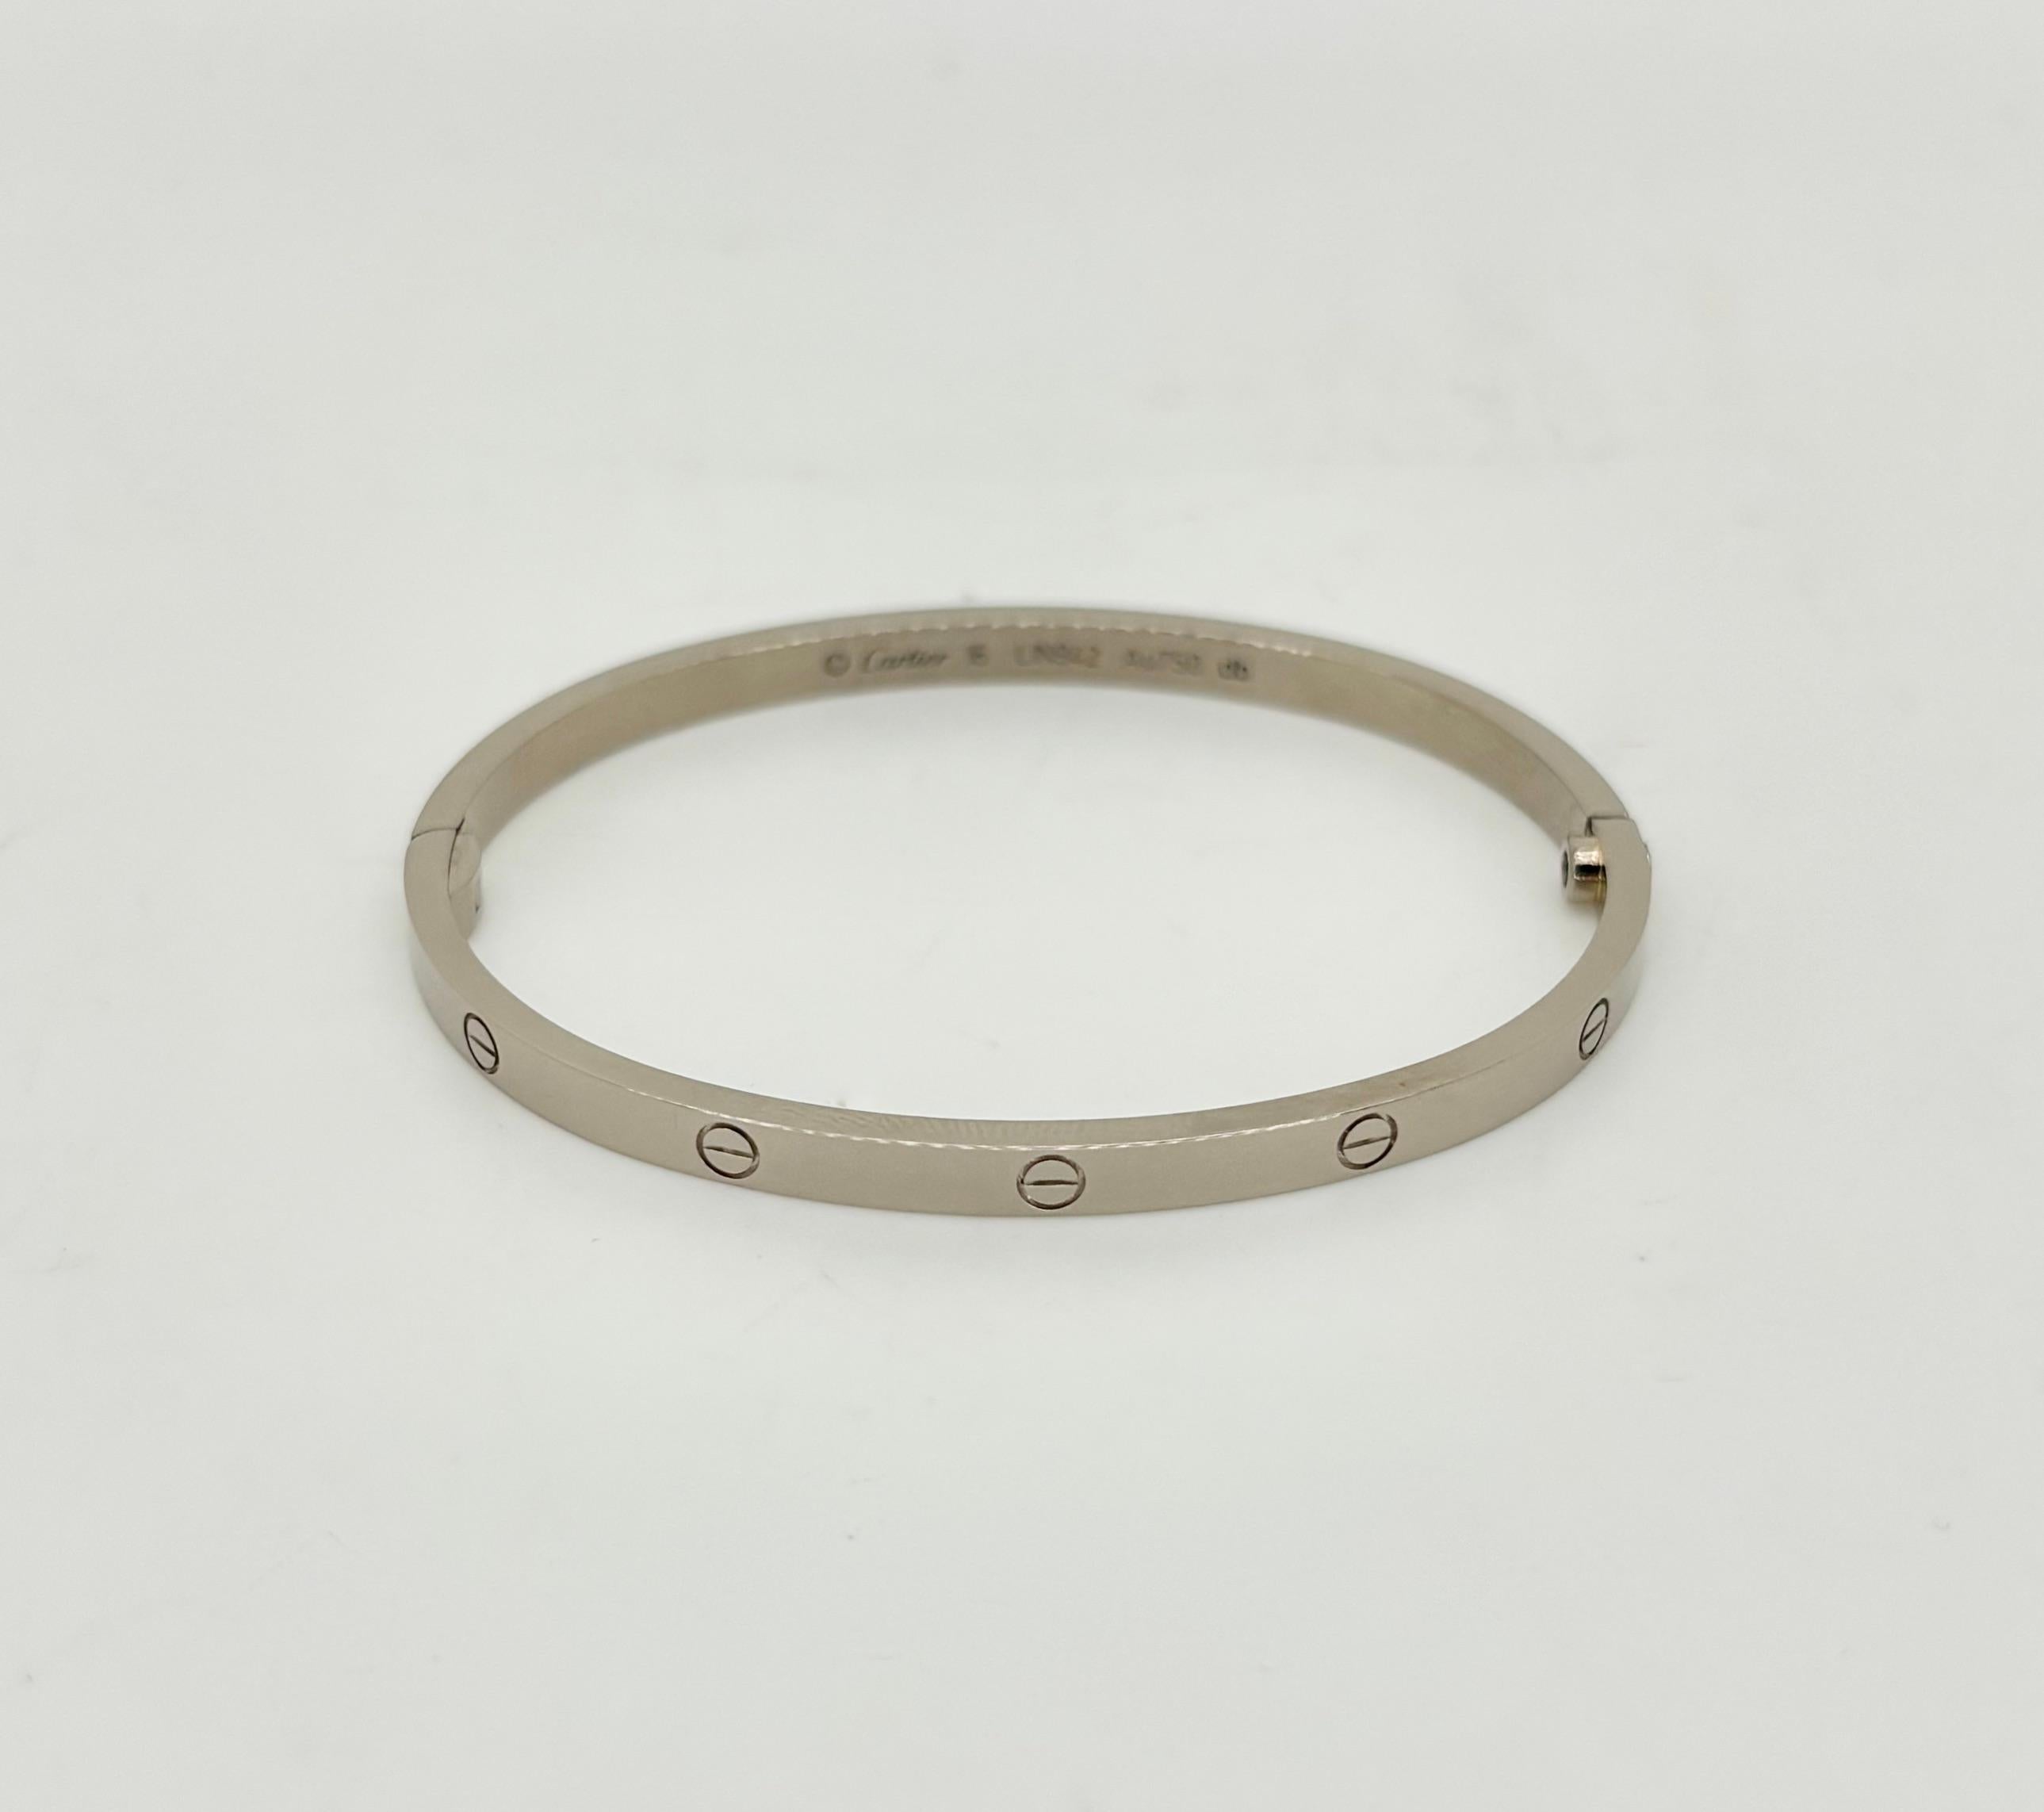 Authentic Cartier LOVE bracelet made in 18k white gold with original box and screw driver. 

Designer: Cartier
Metal: 18k White Gold
Bracelet Size: 16 - 5.75